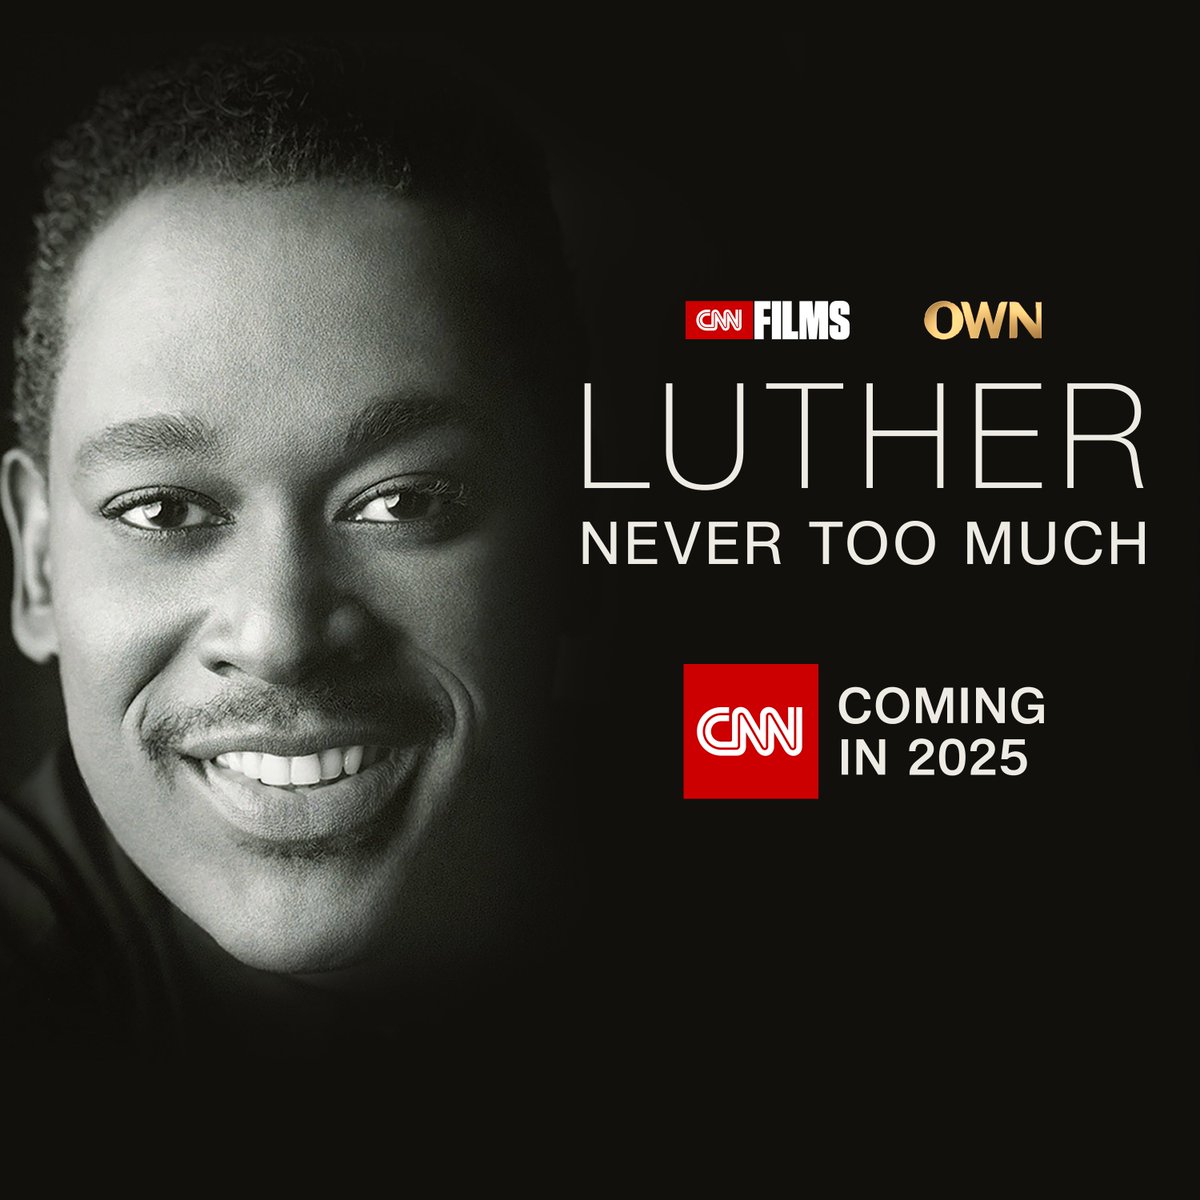 Relive the many stunning moments of Vandross’ Grammy® award-winning musical career and his lifelong battle to earn the respect his music deserved. From award-winning director @dawnporter. 
Luther: Never Too Much is coming to @CNNOriginals  and @OWNTV  in 2025.